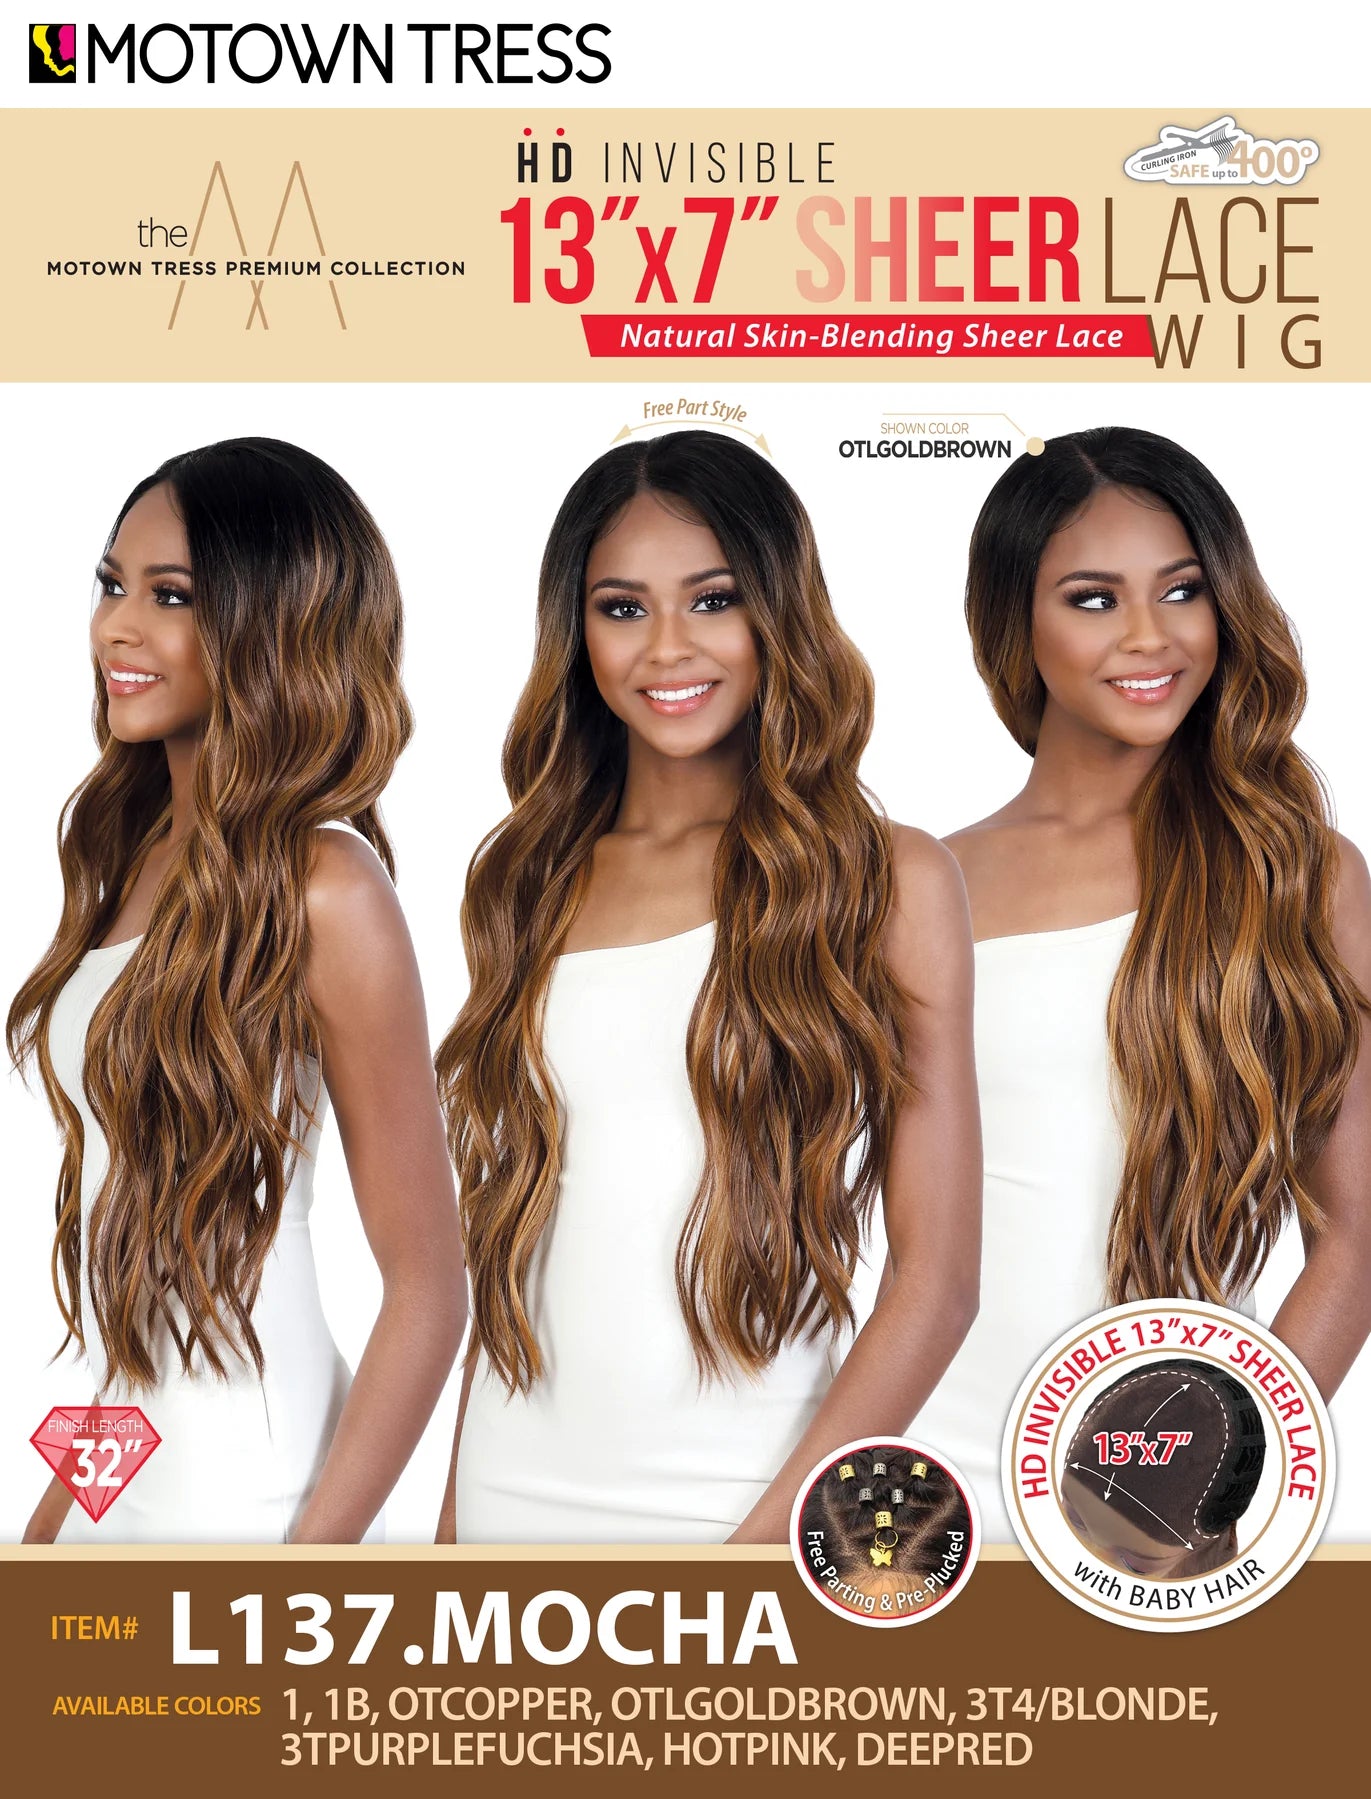 Motown Tress HD Invisible 13X7 Sheer Lace Wig Synthetic Hair L137.MOCHA 32"